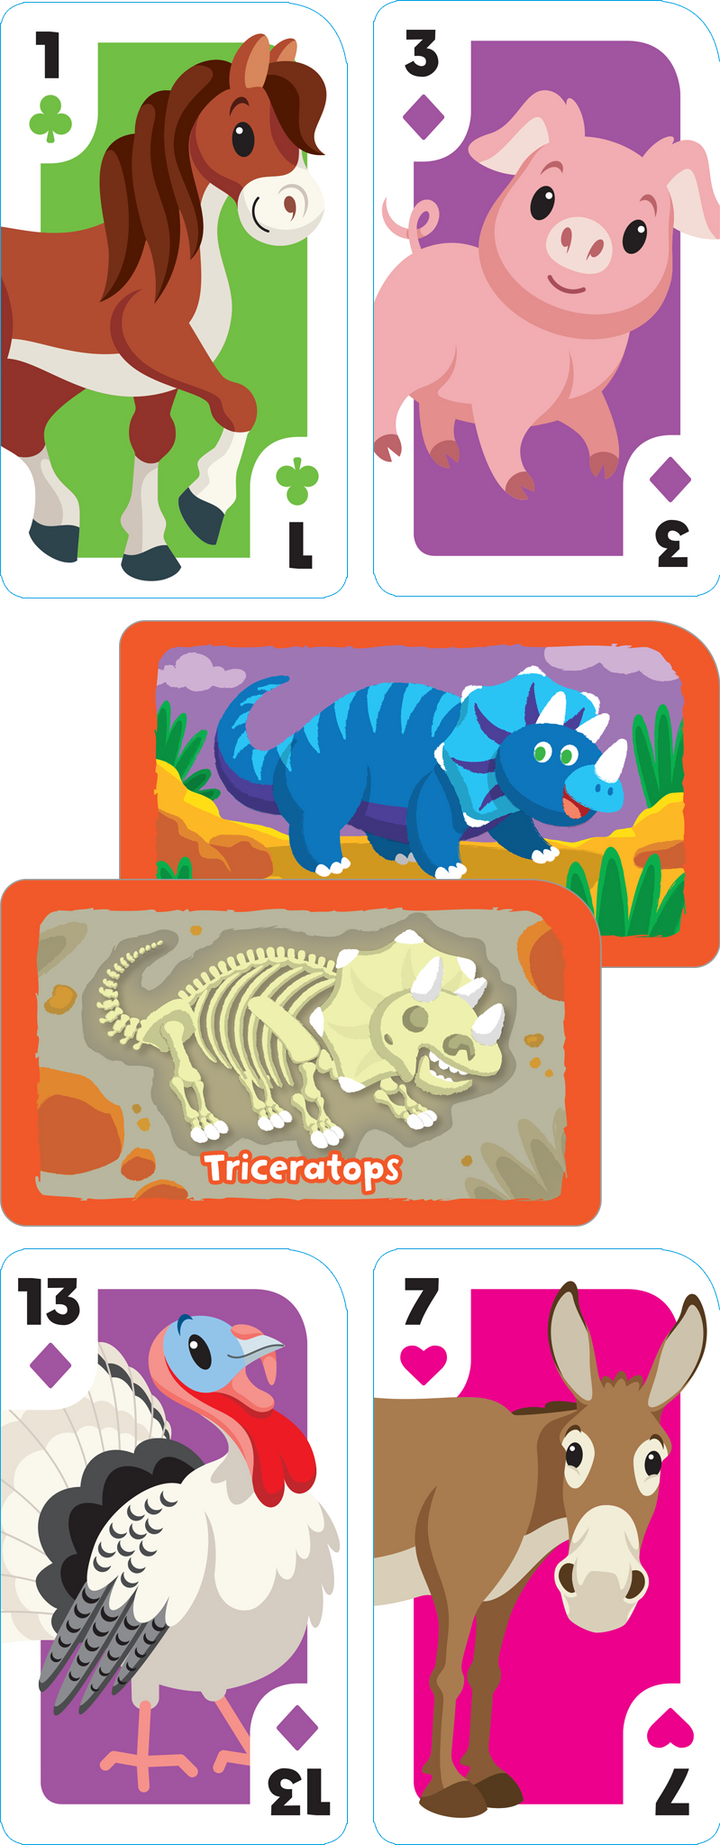 Adorable illustrations in this Get Ready Game Cards Farm Animal Rummy & Dino Dig 2-Pack add to the fun and focus!